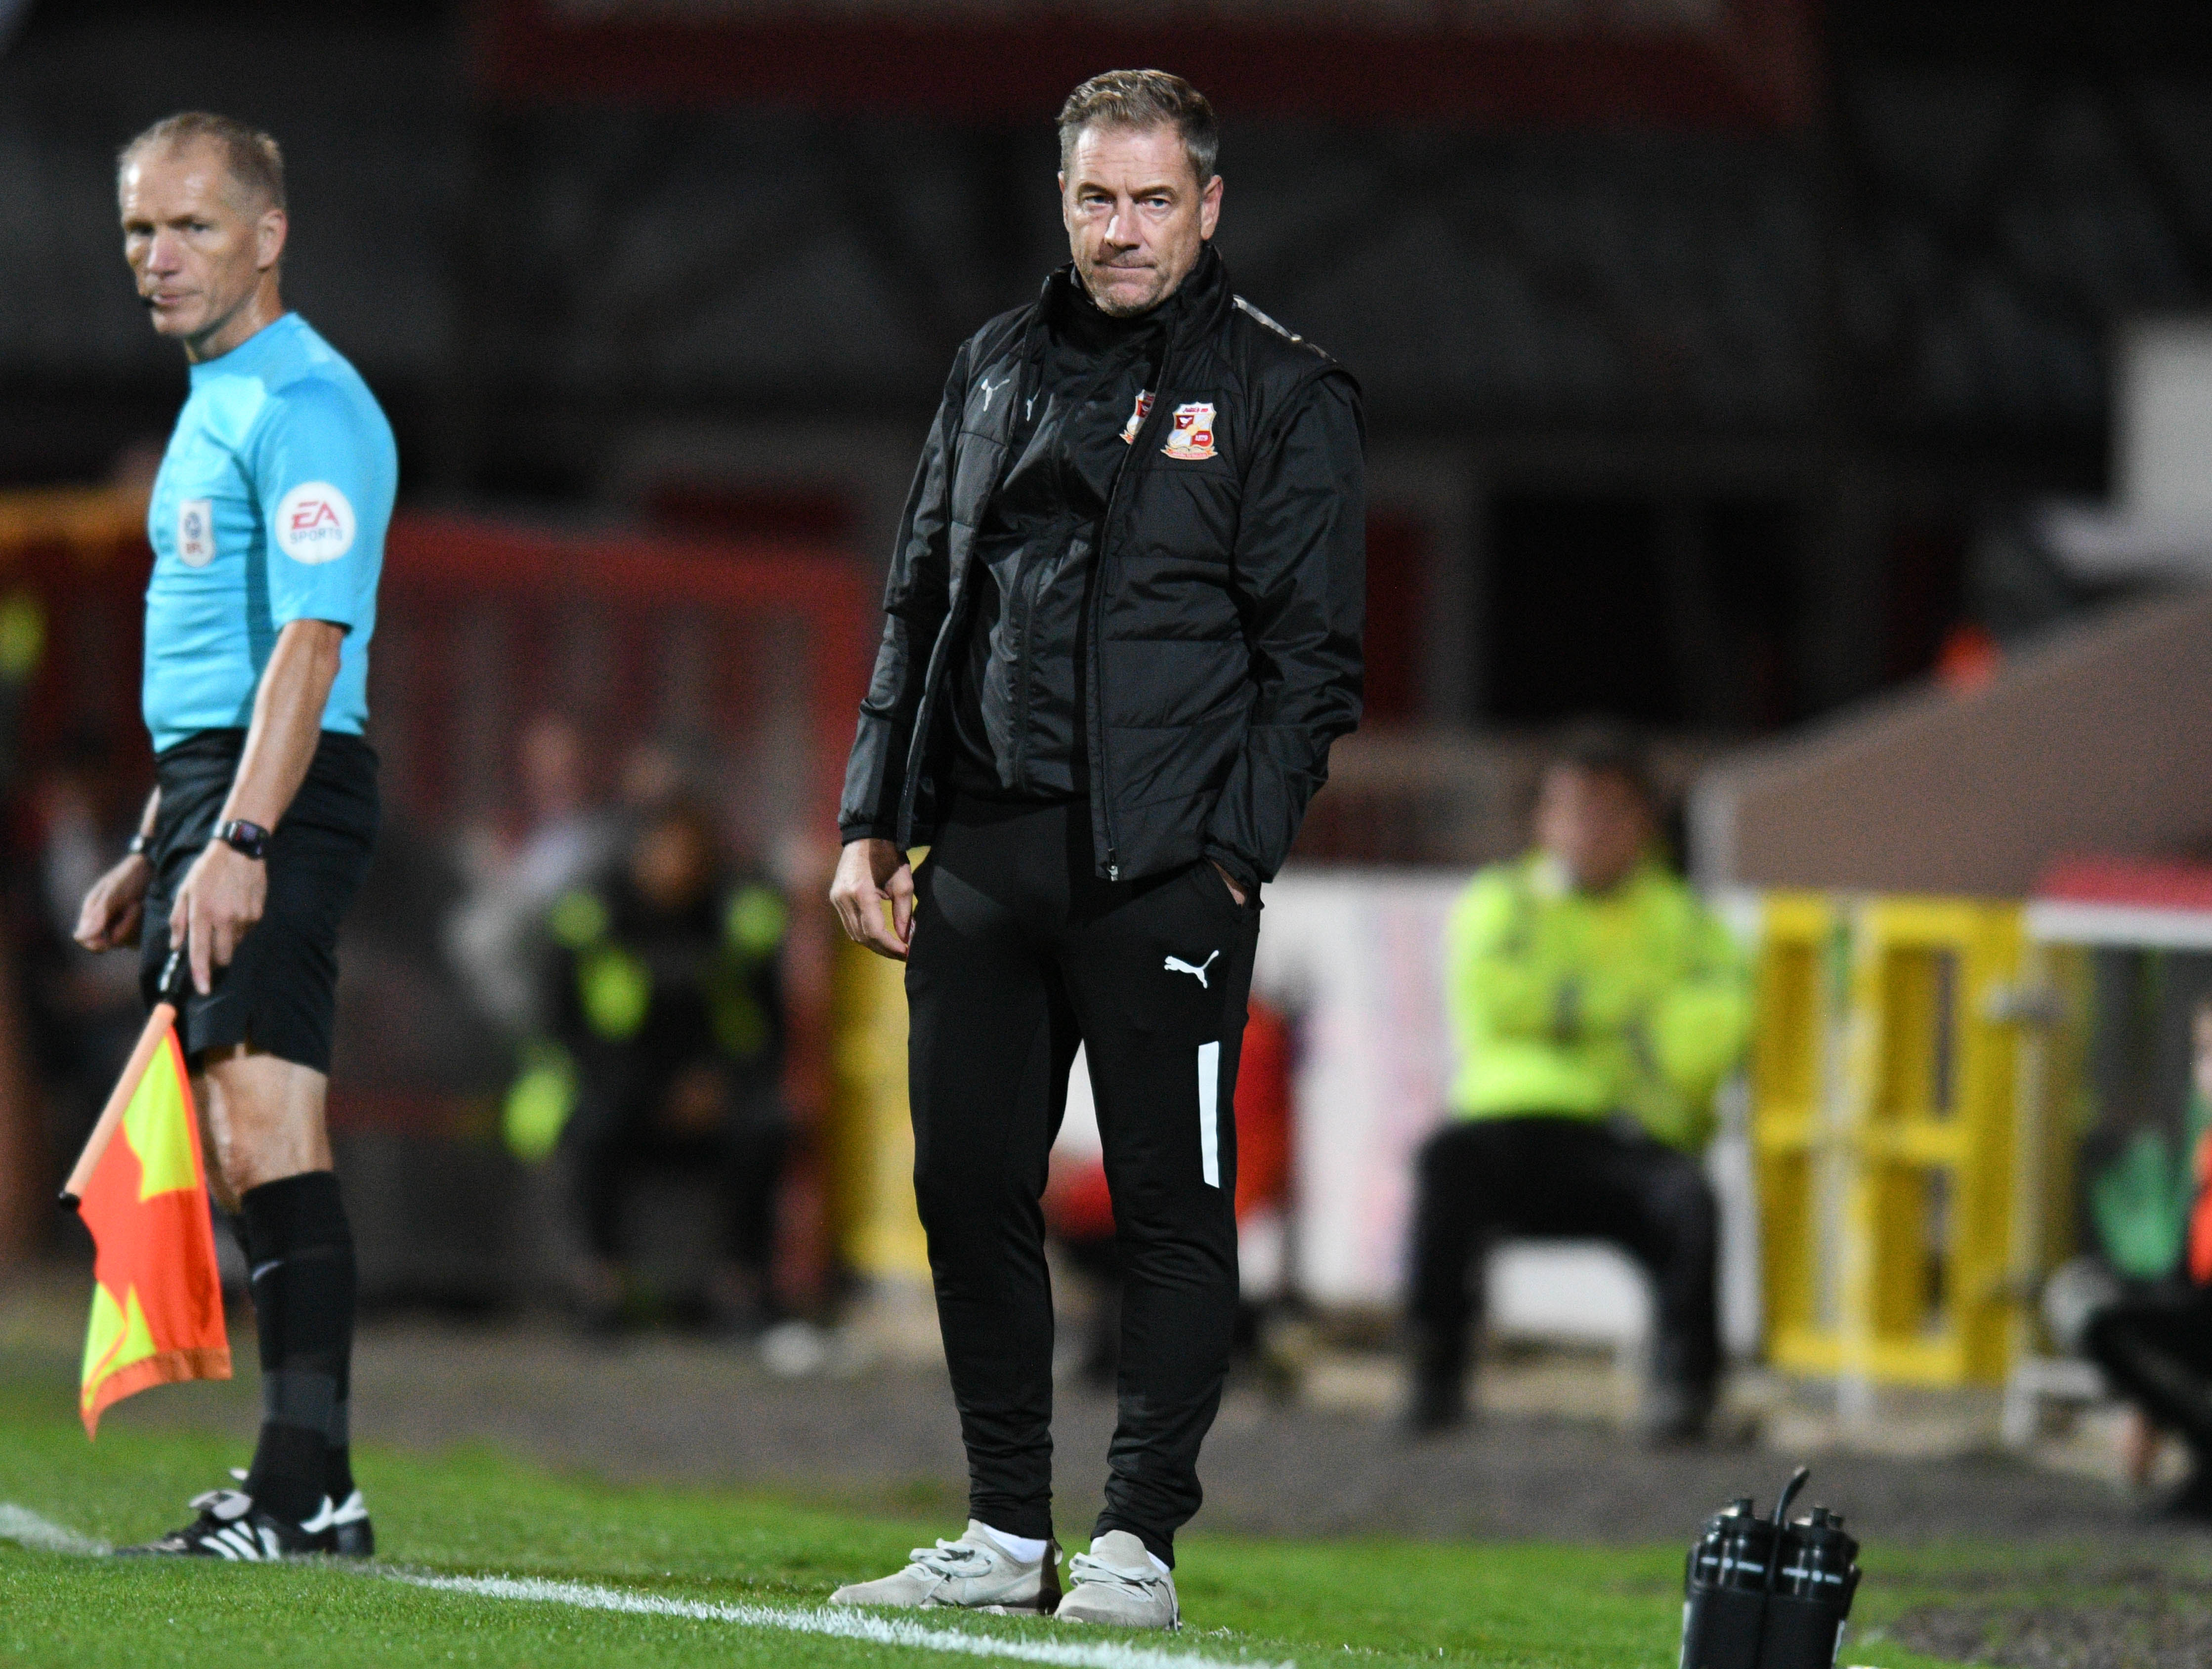 Scott Lindsey was disappointed that defensive lapses cost his team against Northampton